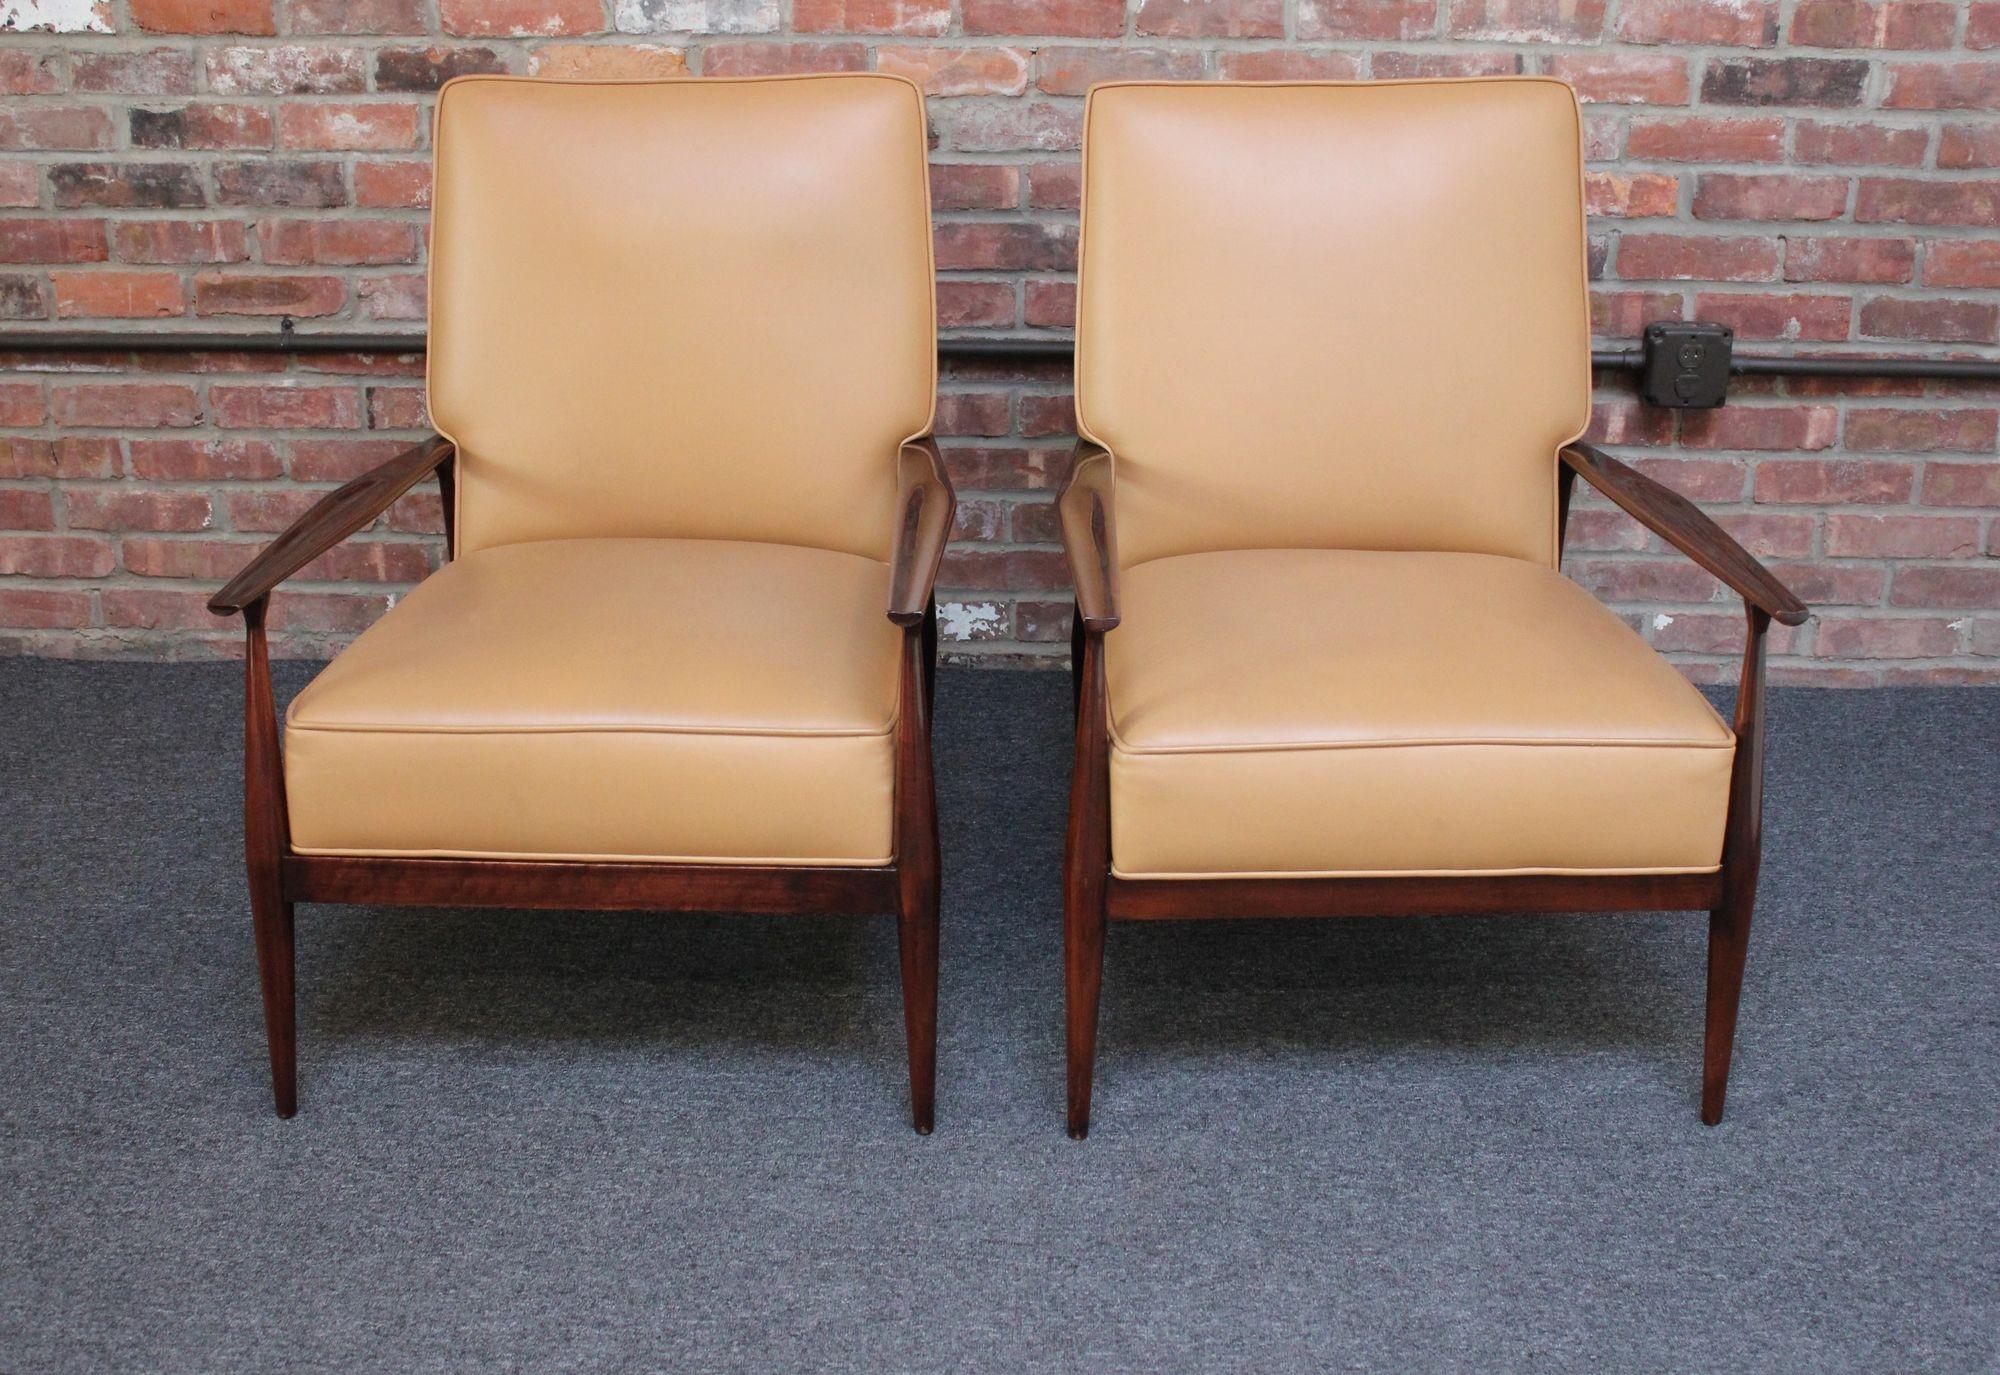 Coveted pair of Paul Mccobb Planner Group armchairs made between 1955 and 1956 (Winchendon, MA, USA).
Sculptural seat/back frame contoured to accentuate the slim, carved armrests.
Sharp, handsome set with crisp lines, presenting well from all